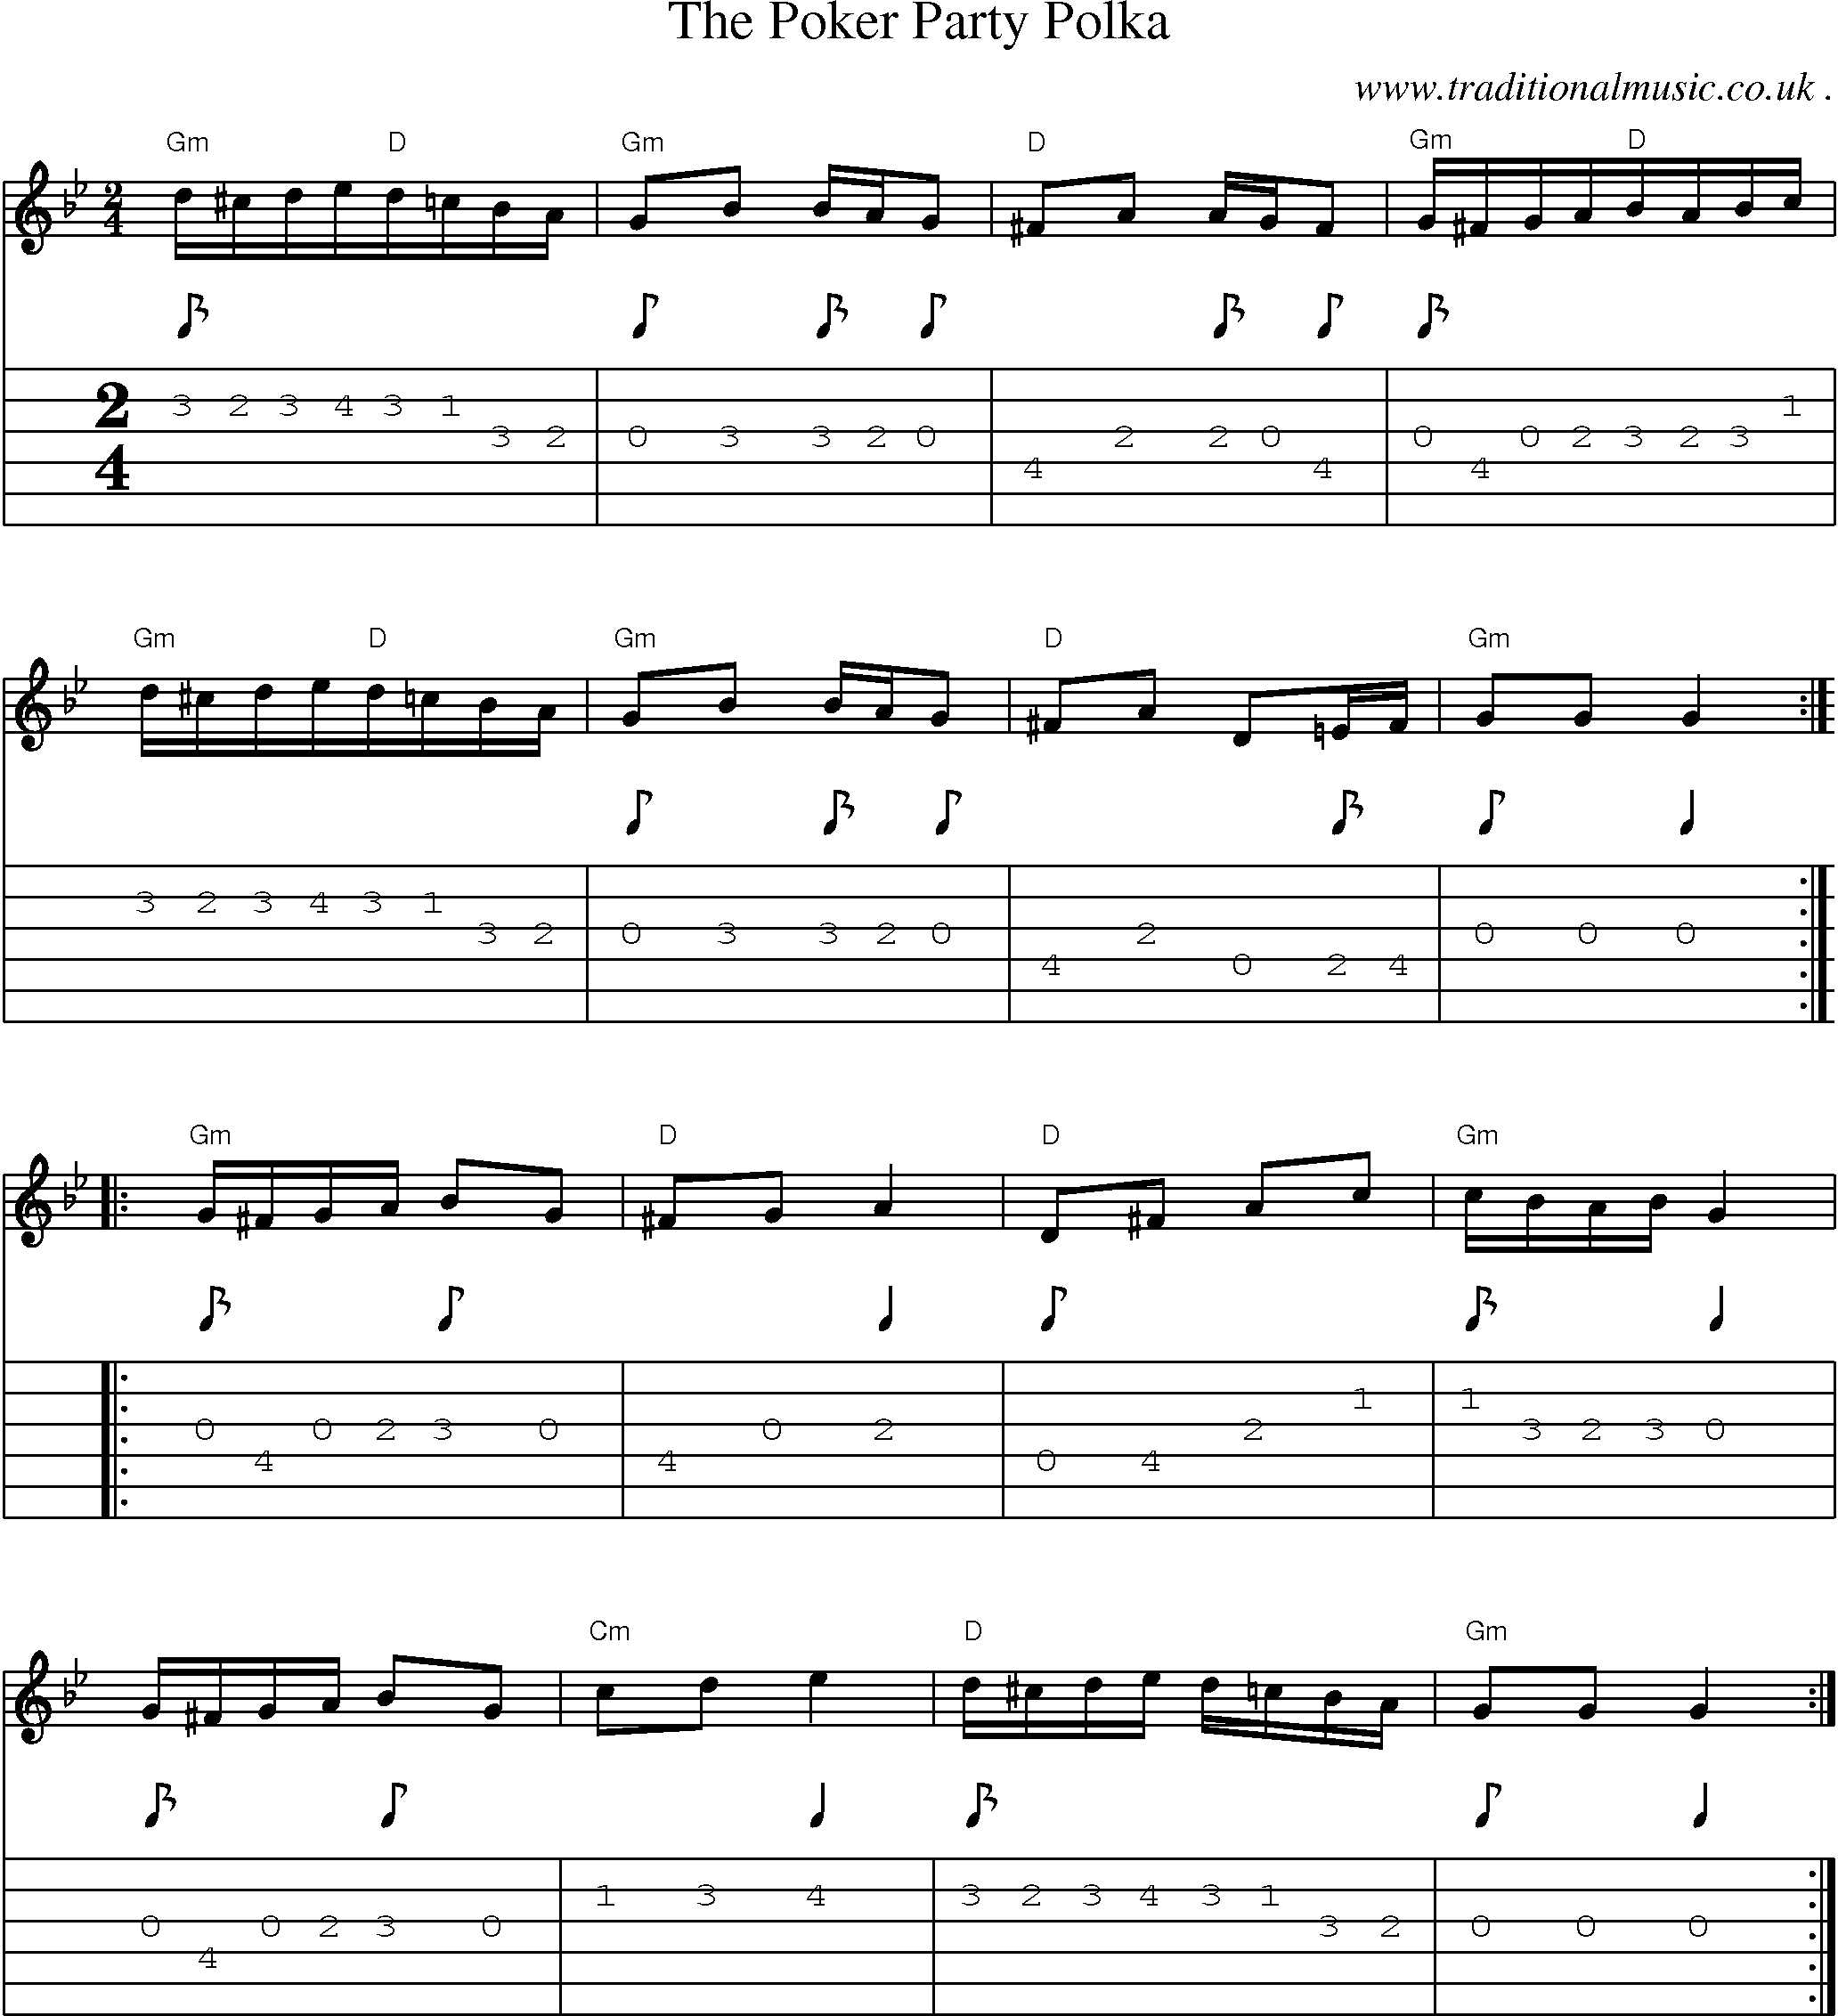 Sheet-Music and Guitar Tabs for The Poker Party Polka